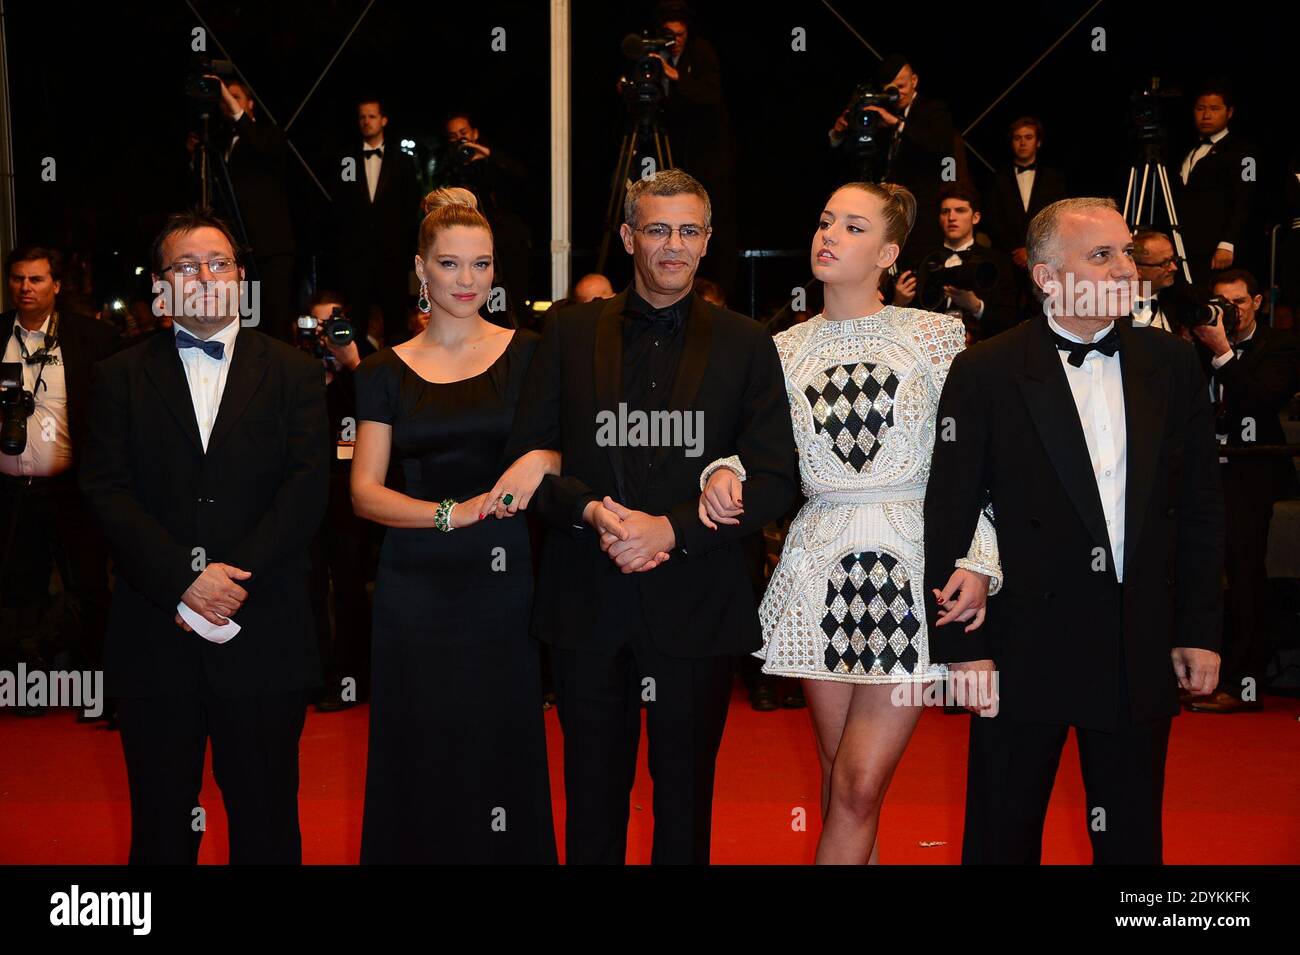 Director Abdellatif Kechiche, Lea Seydoux, Vincent Maraval, Adele Exarchopoulos, Brahim Chioua arriving for La Vie D'Adele screening held at the Palais Des Festivals as part of the 66th Cannes Film Festival in Cannes, France on May 23, 2013. Photo by Nicolas Briquet/ABACAPRESS.COM Stock Photo